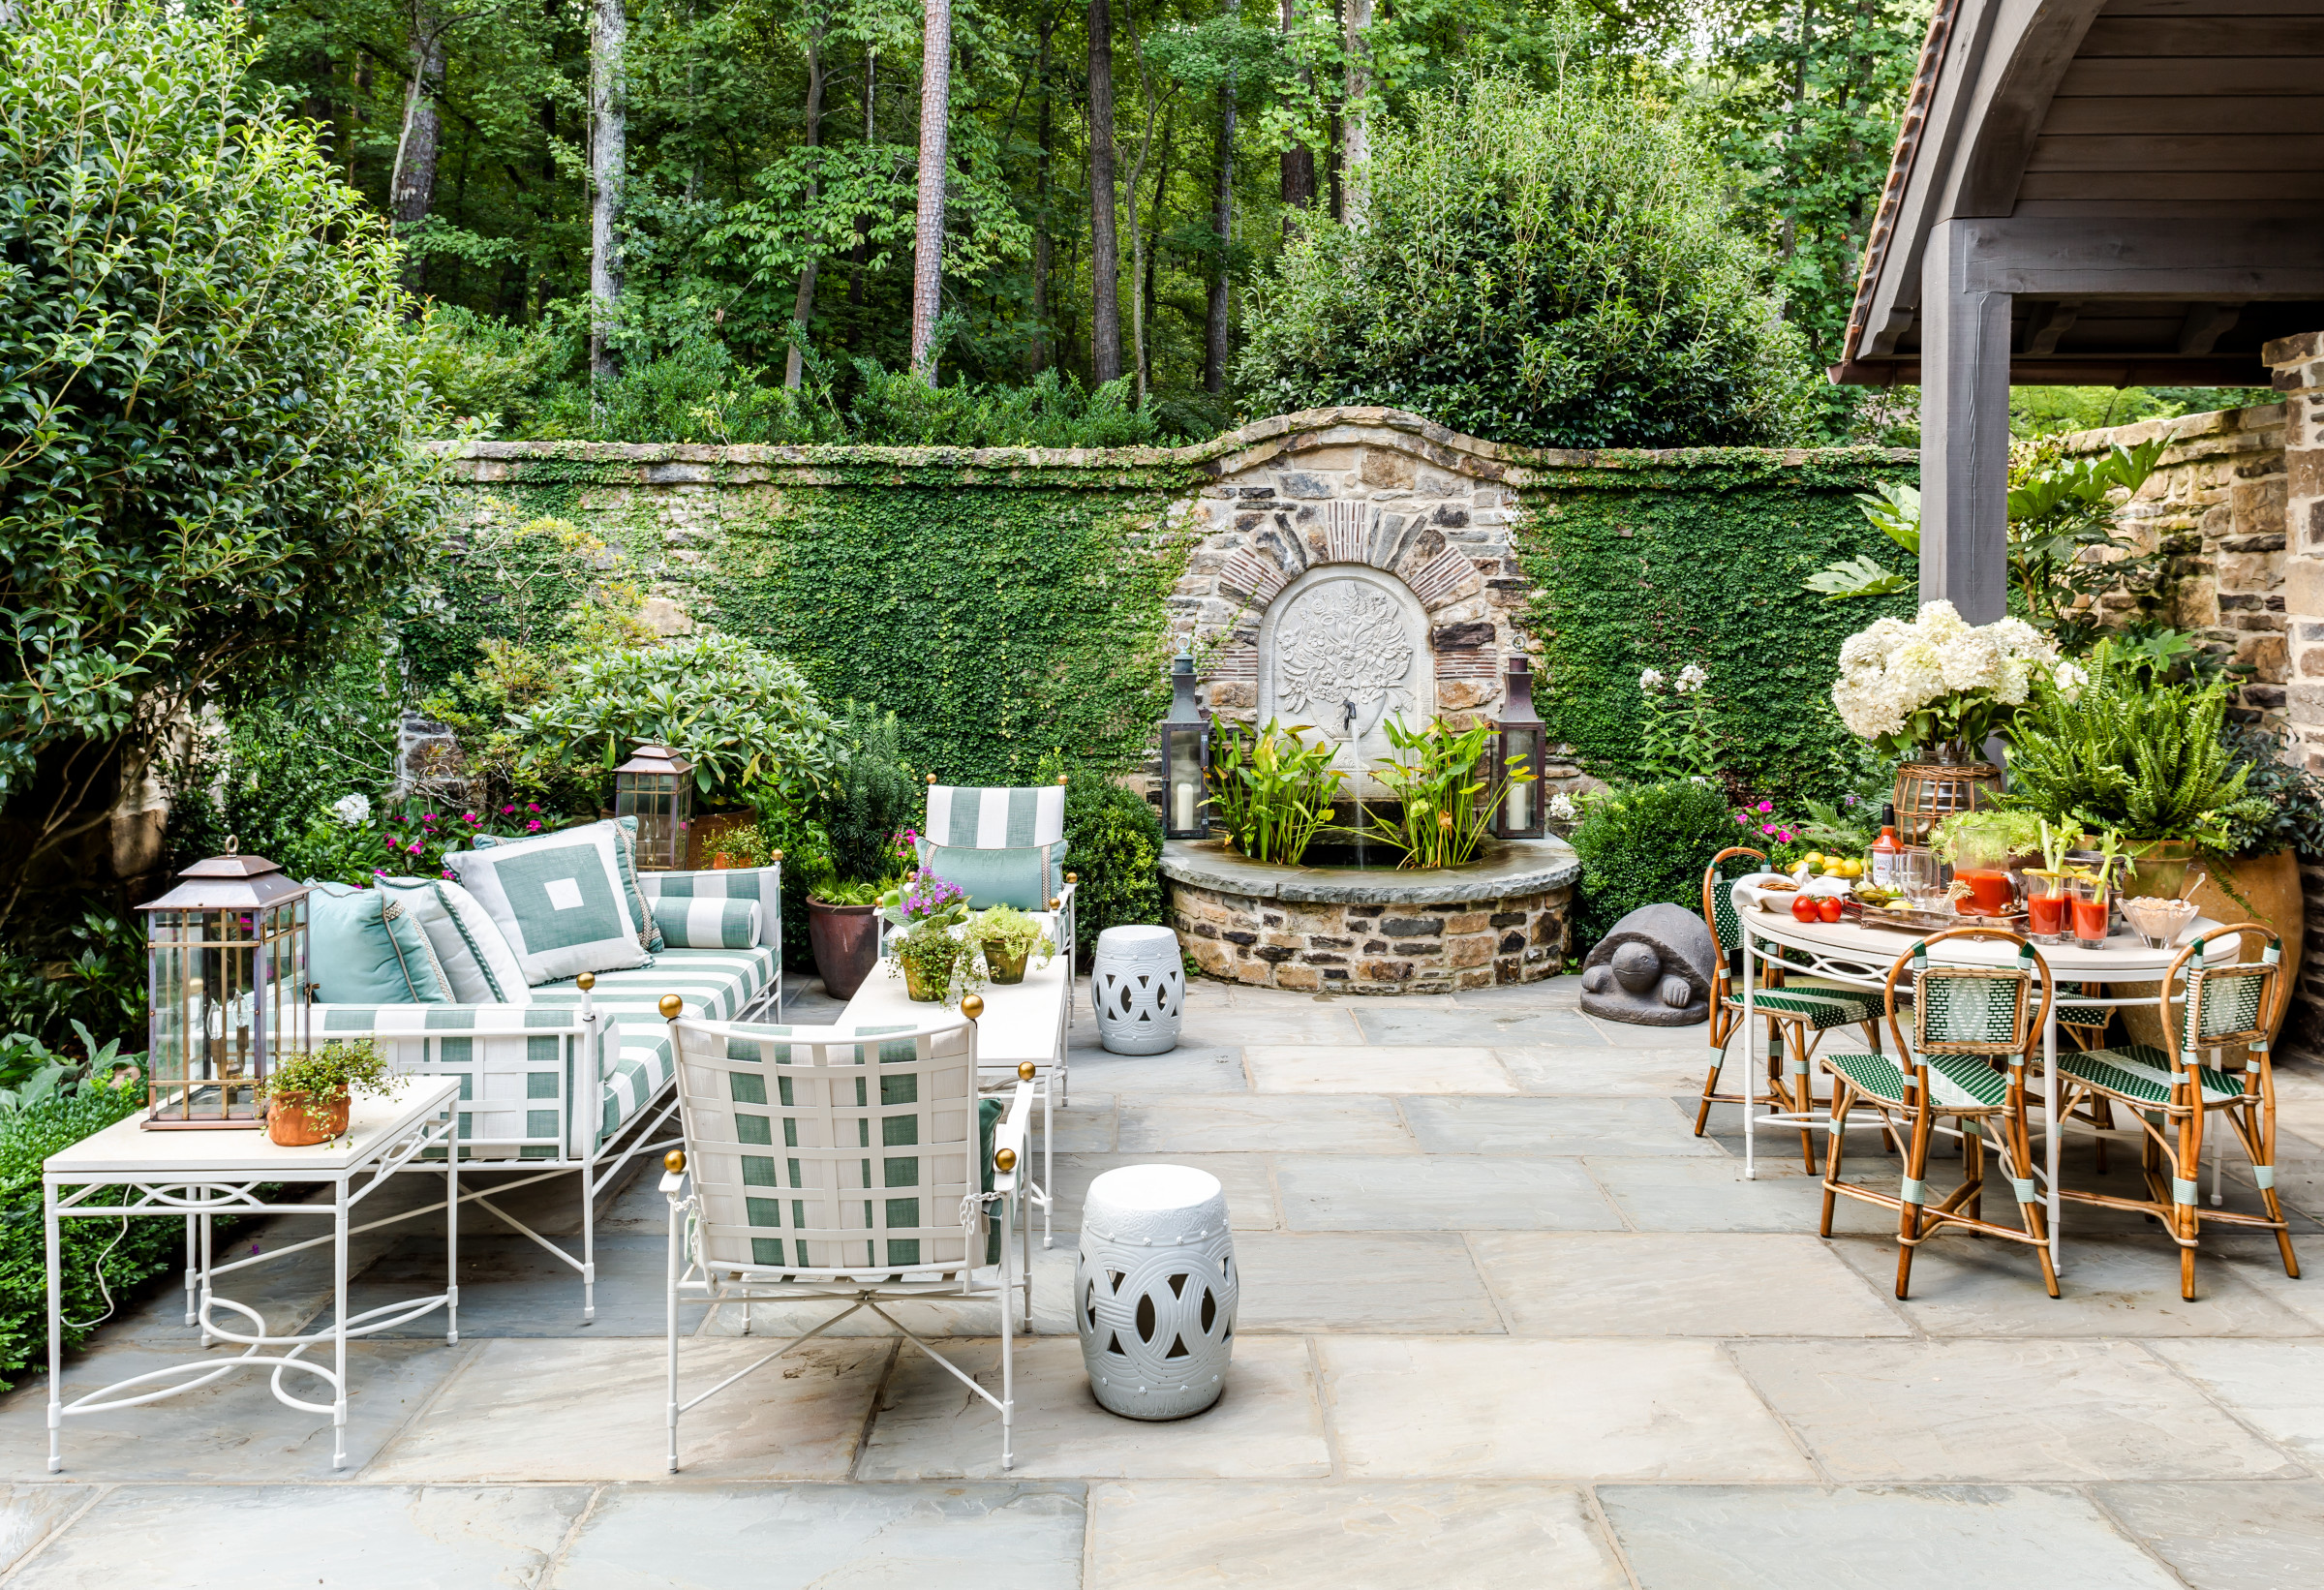 Outdoor living room ideas: 31 ways to create space to unwind |